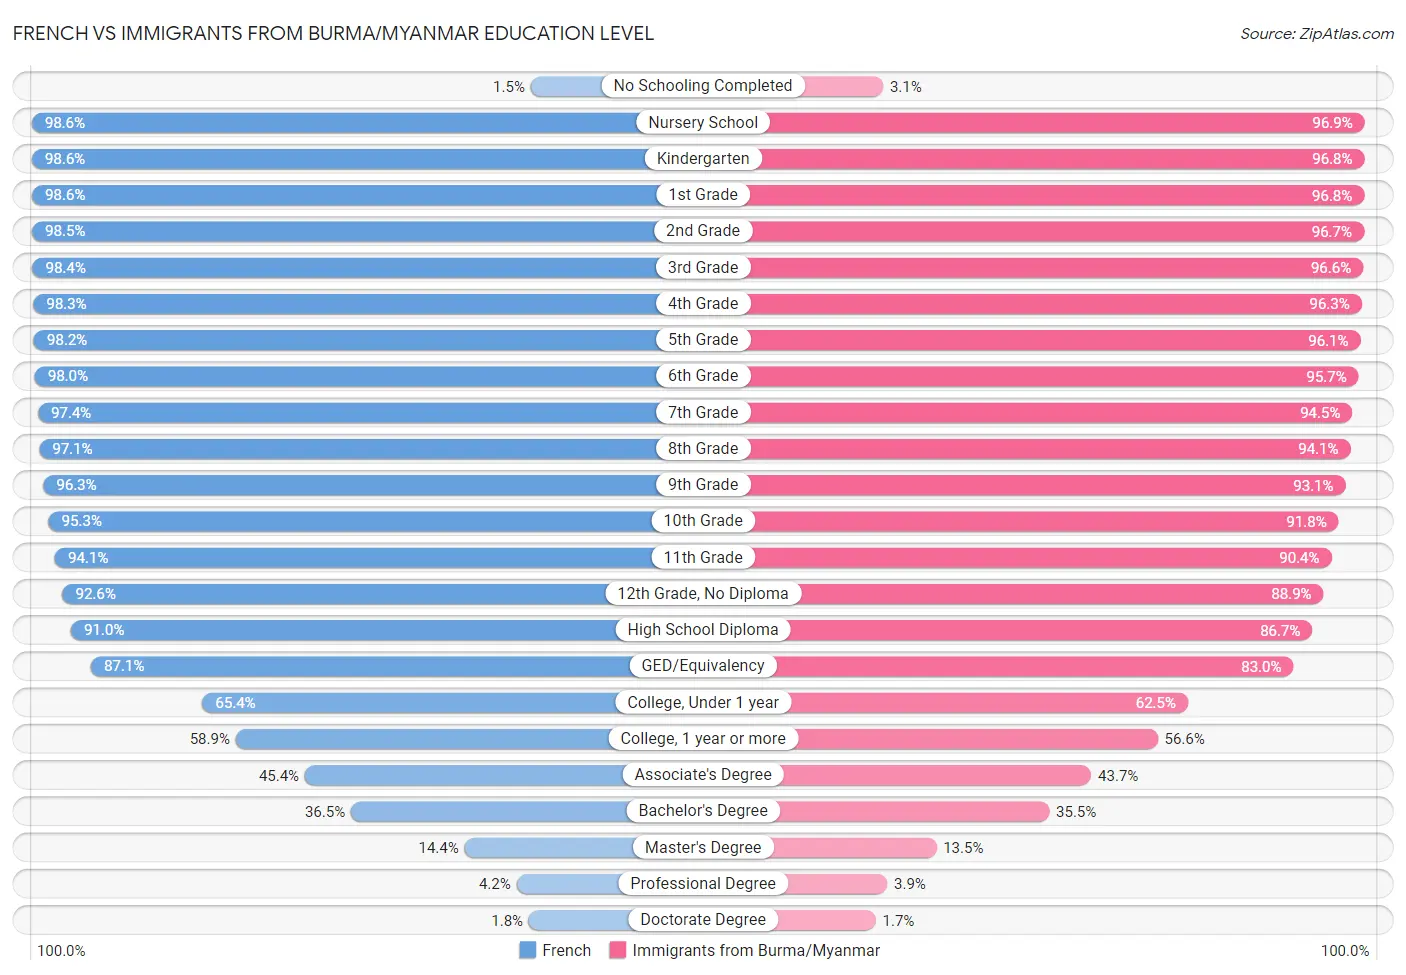 French vs Immigrants from Burma/Myanmar Education Level